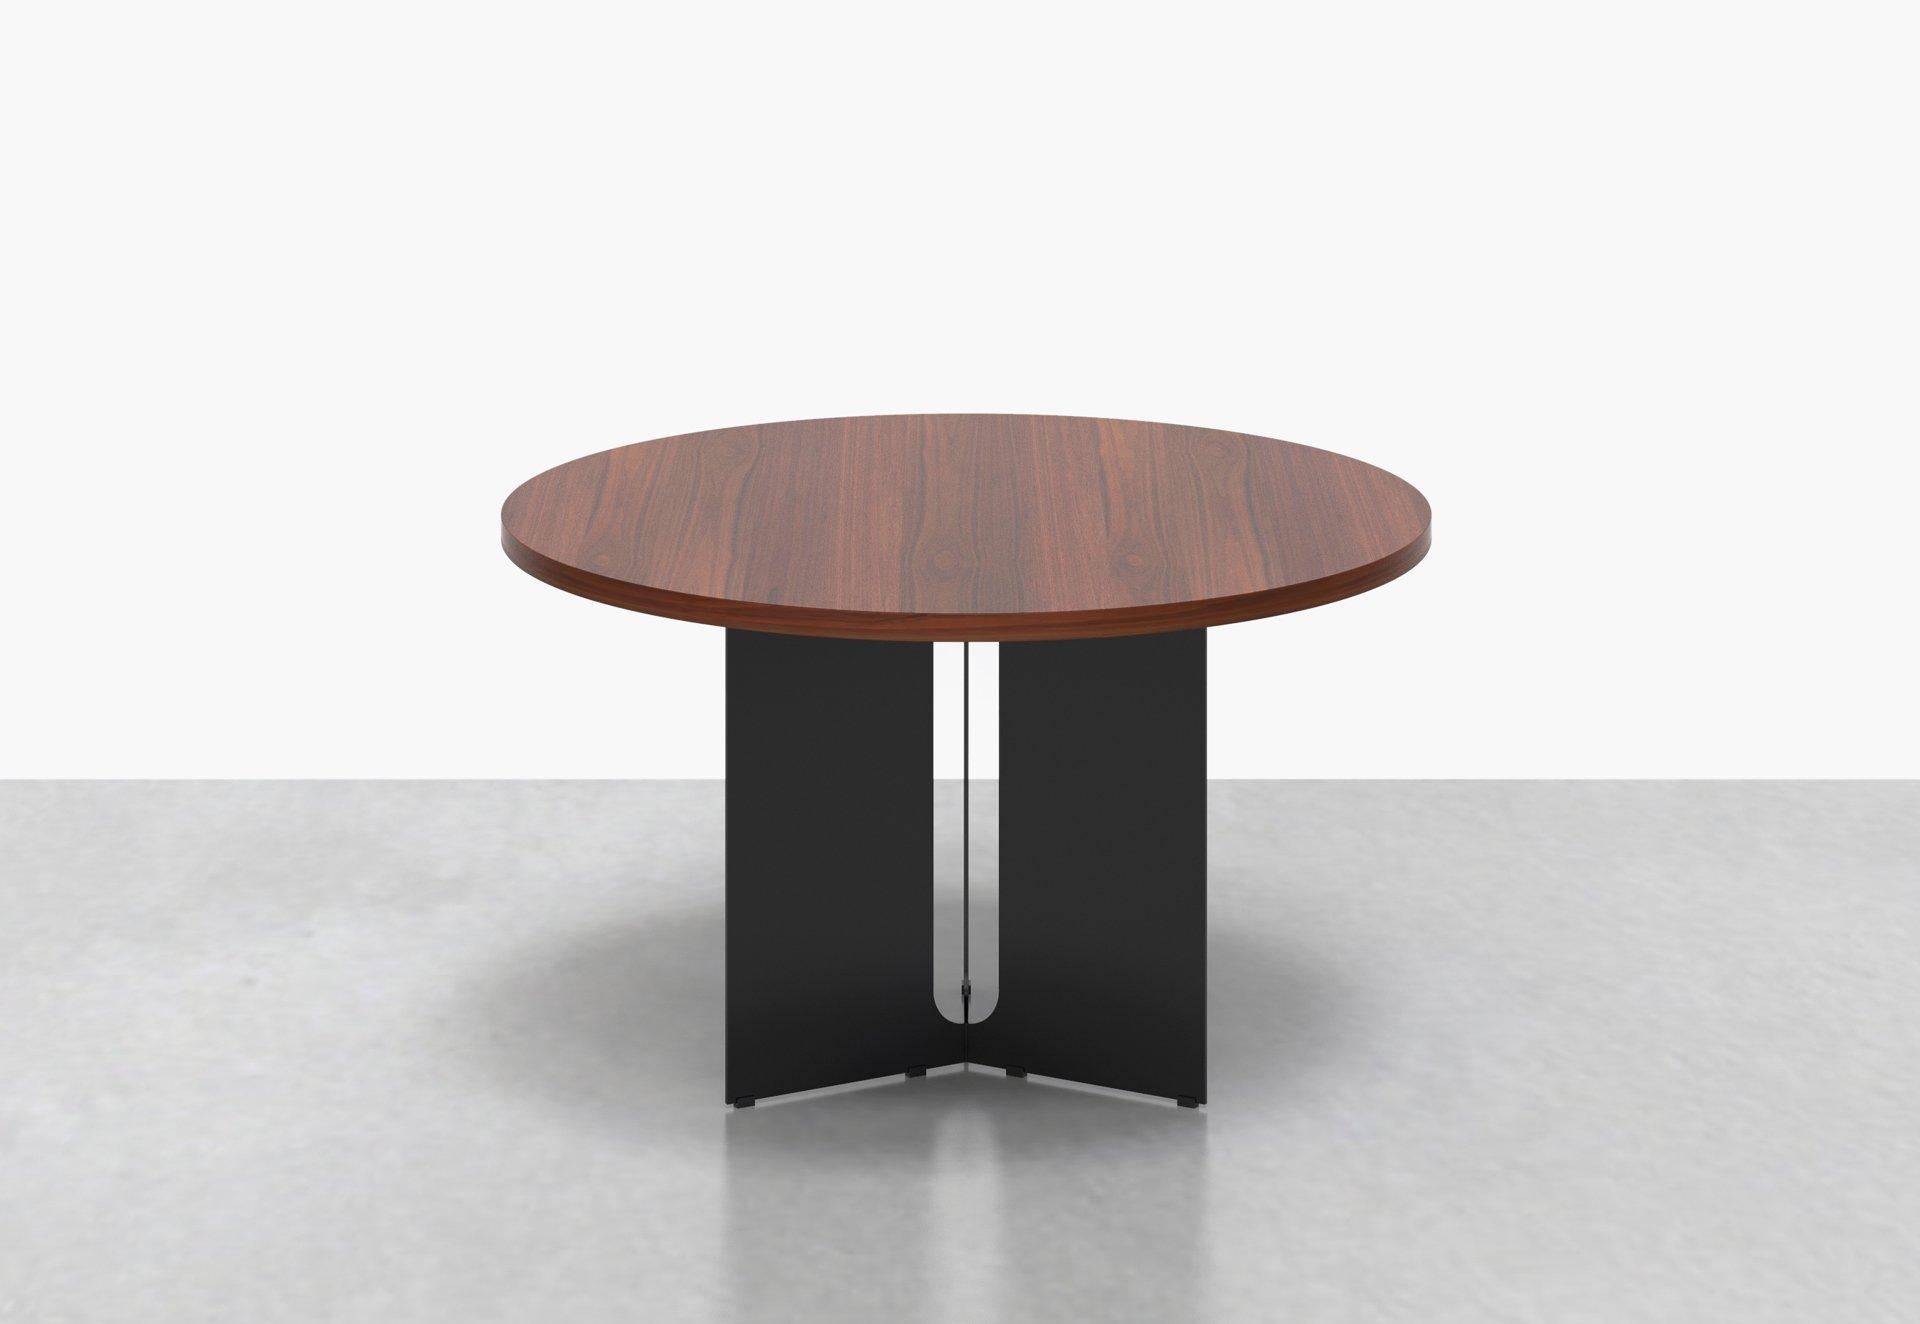 Our Trilo round table is polished but unpretentious. Choose between a solid walnut or variegated white marble top, anchored by a steel base with a playful geometrical cut-out detail. Measures: 48